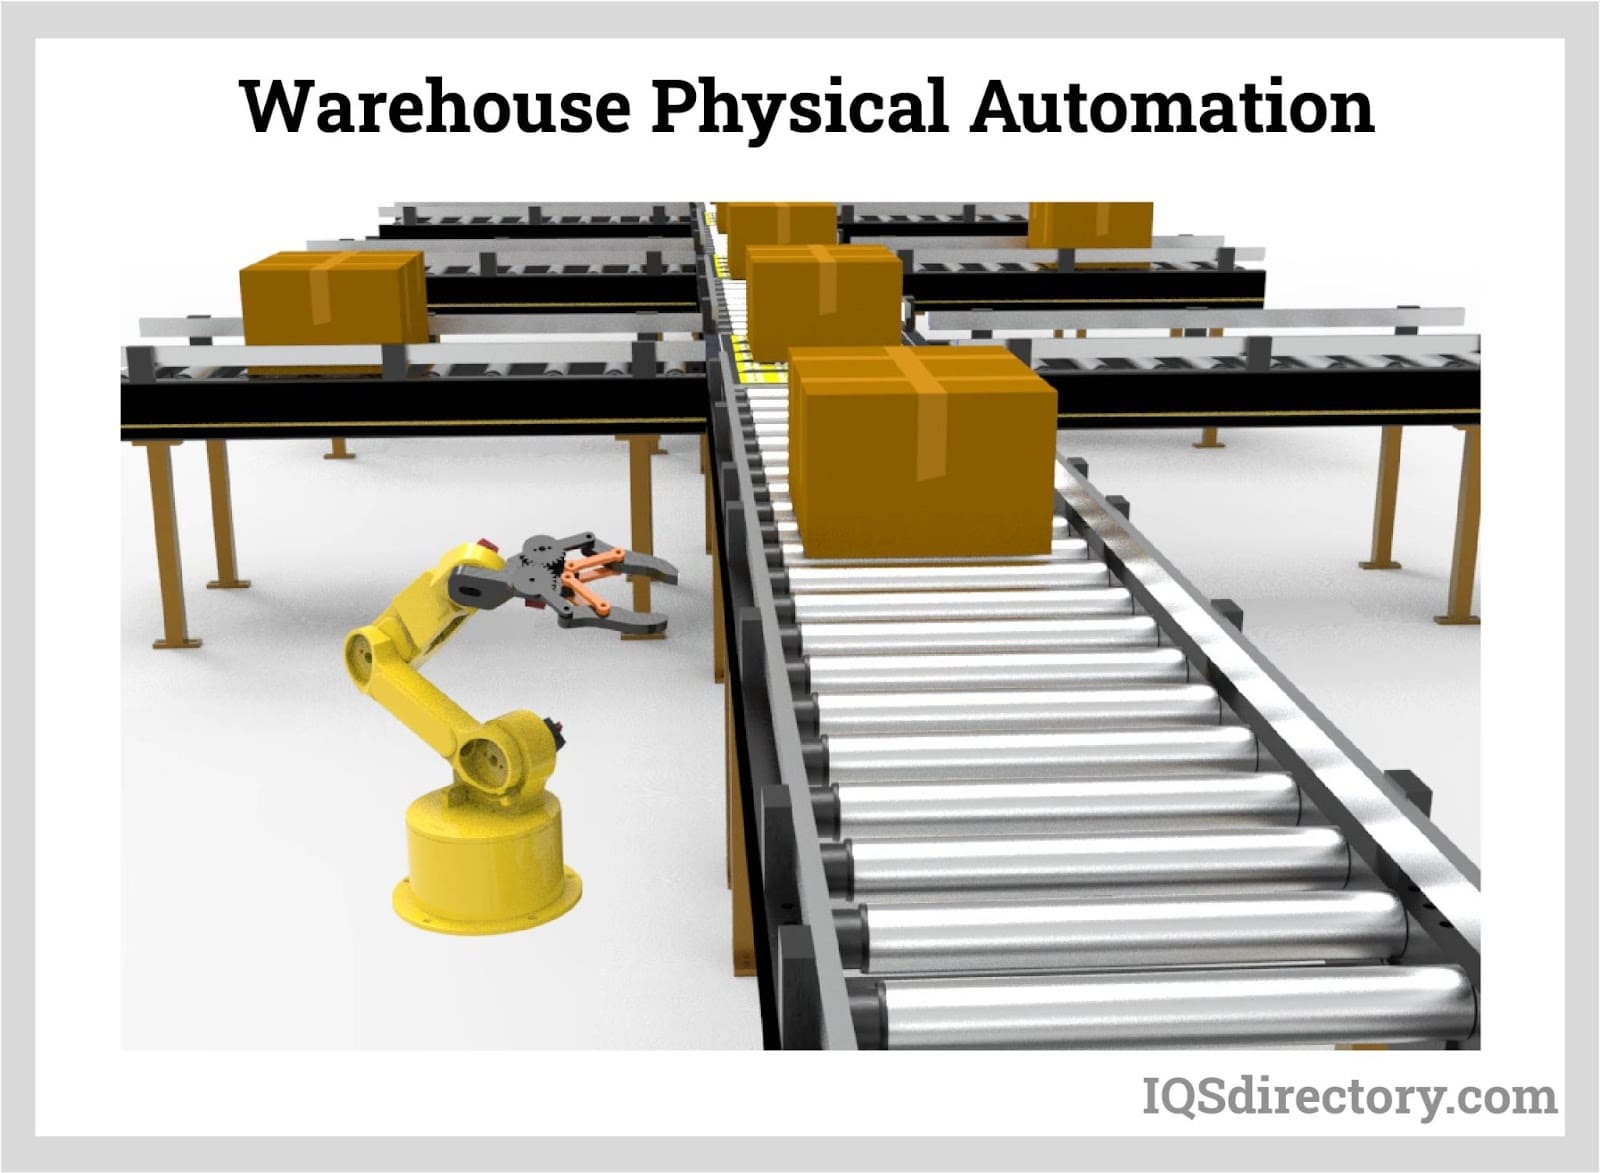 Warehouse Physical Automation